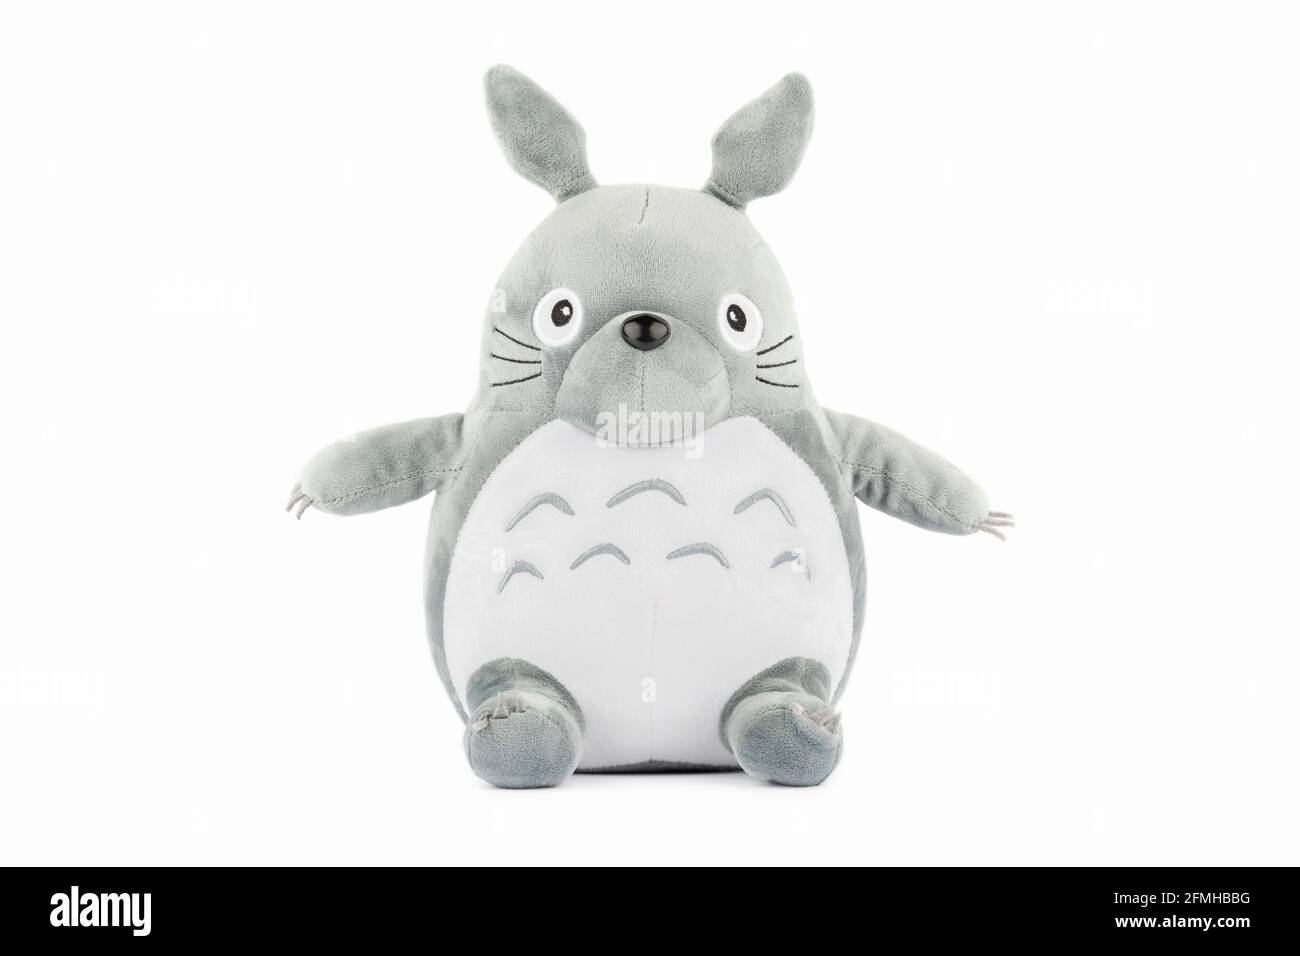 A plush toy of the character Totoro from the film My Neighbor Totoro. Stock Photo